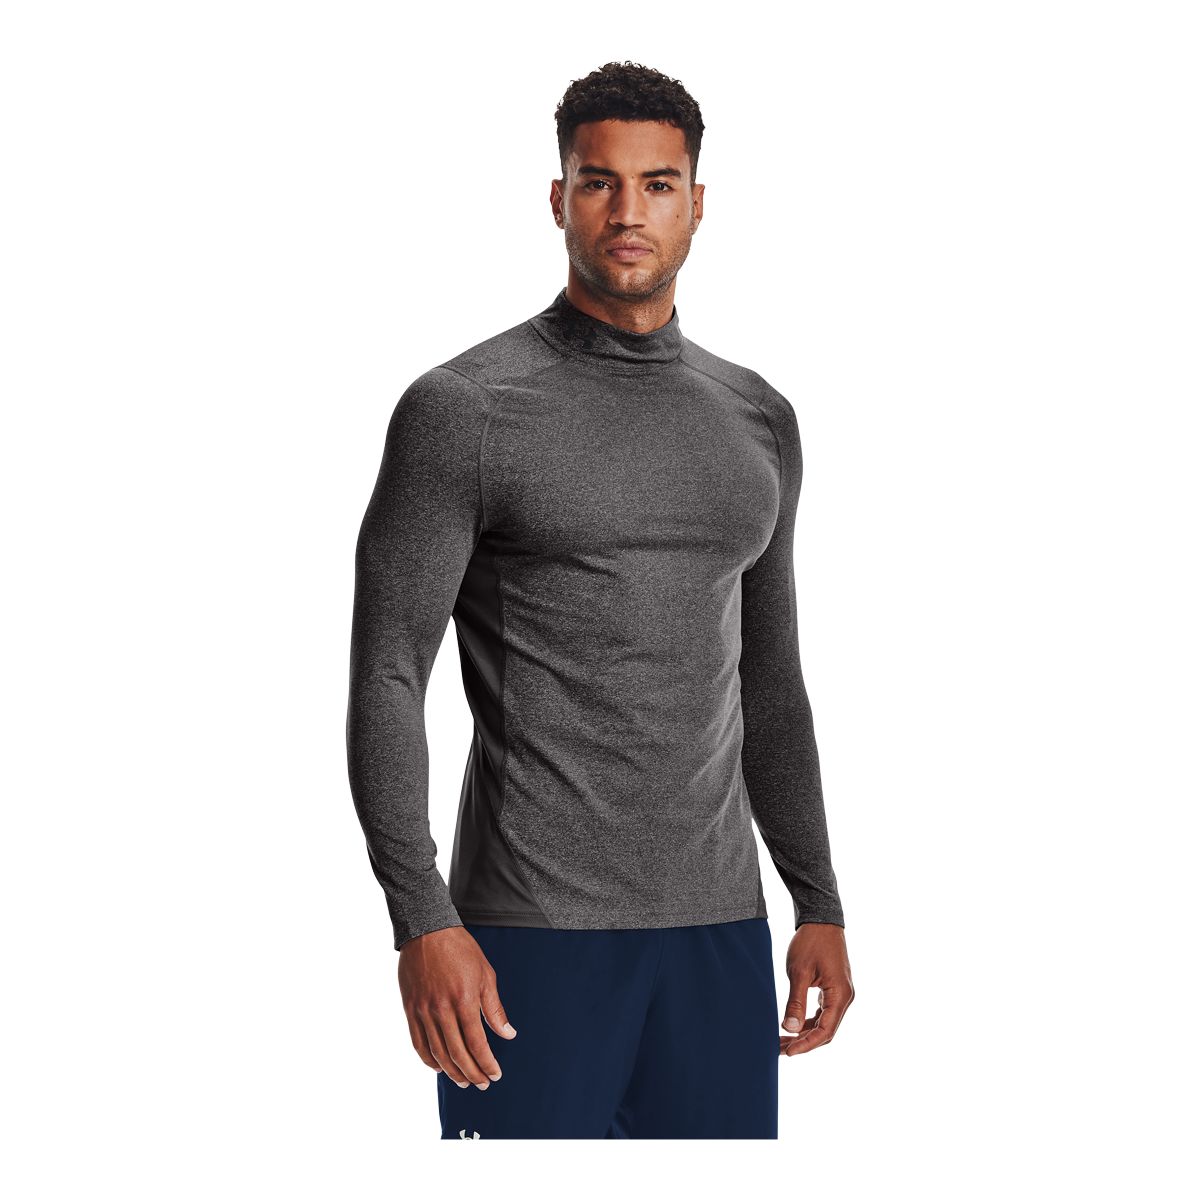 Under Armour Men's ColdGear® Fitted Mock T Shirt